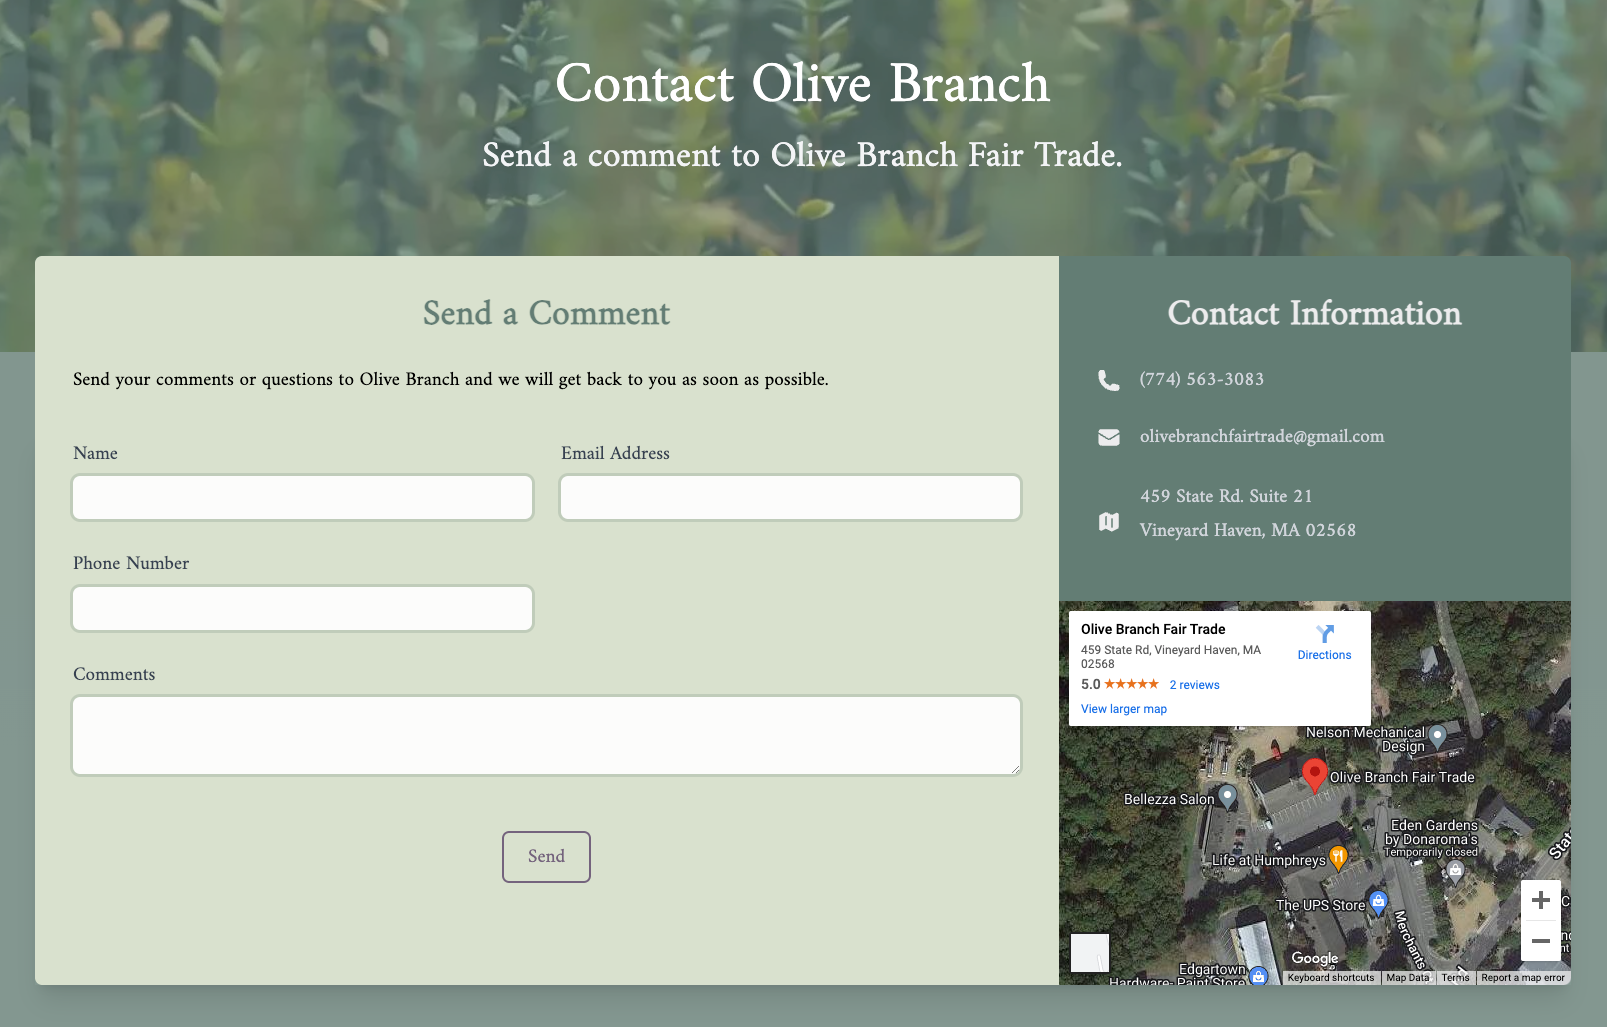 A beautifully designed contact page allows visitors to interact and helps them locate the shop